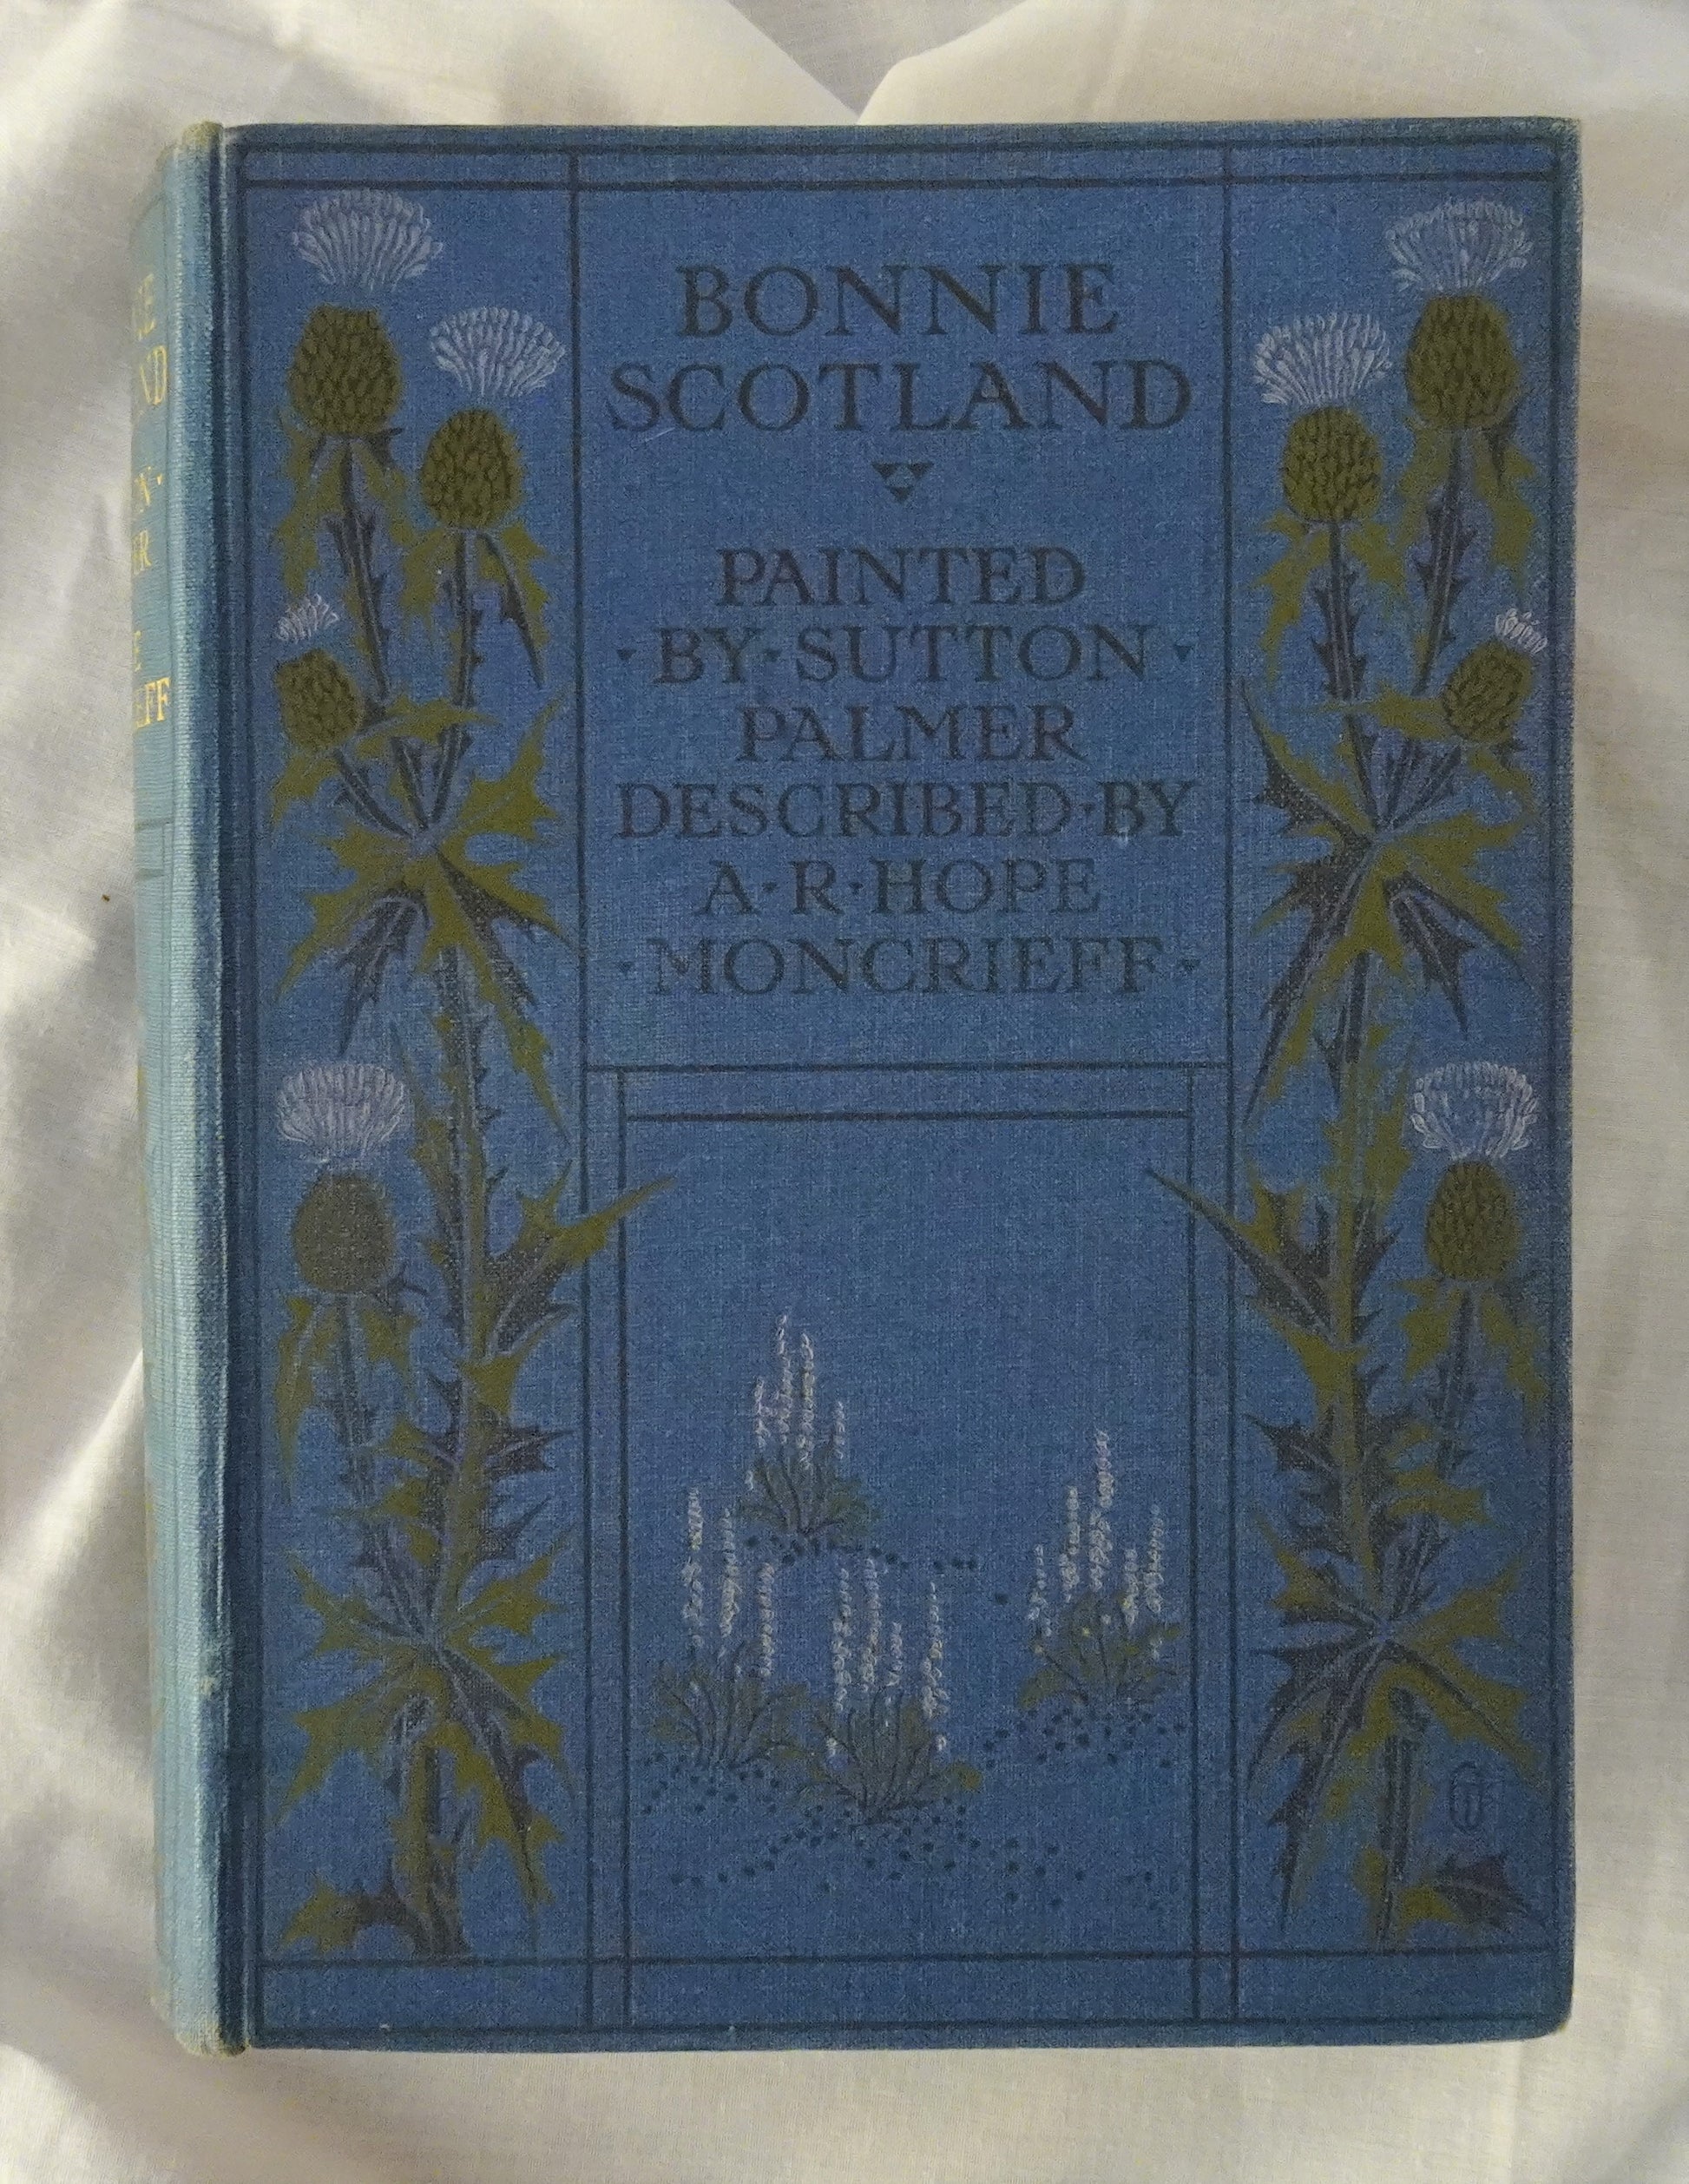 Bonnie Scotland  Painted by Sutton Palmer  Described by A. R. Hope Moncrieff